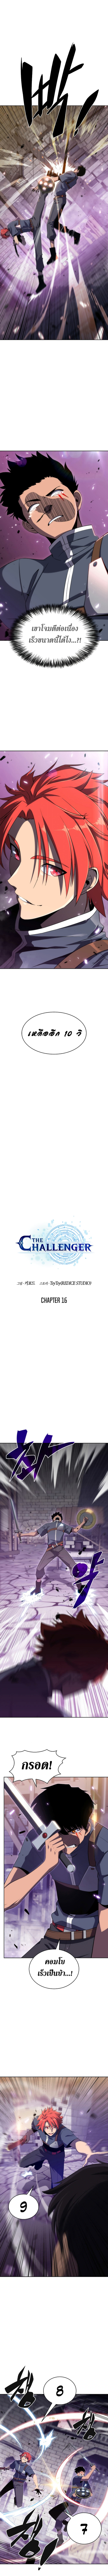 The Challenger16 (2)